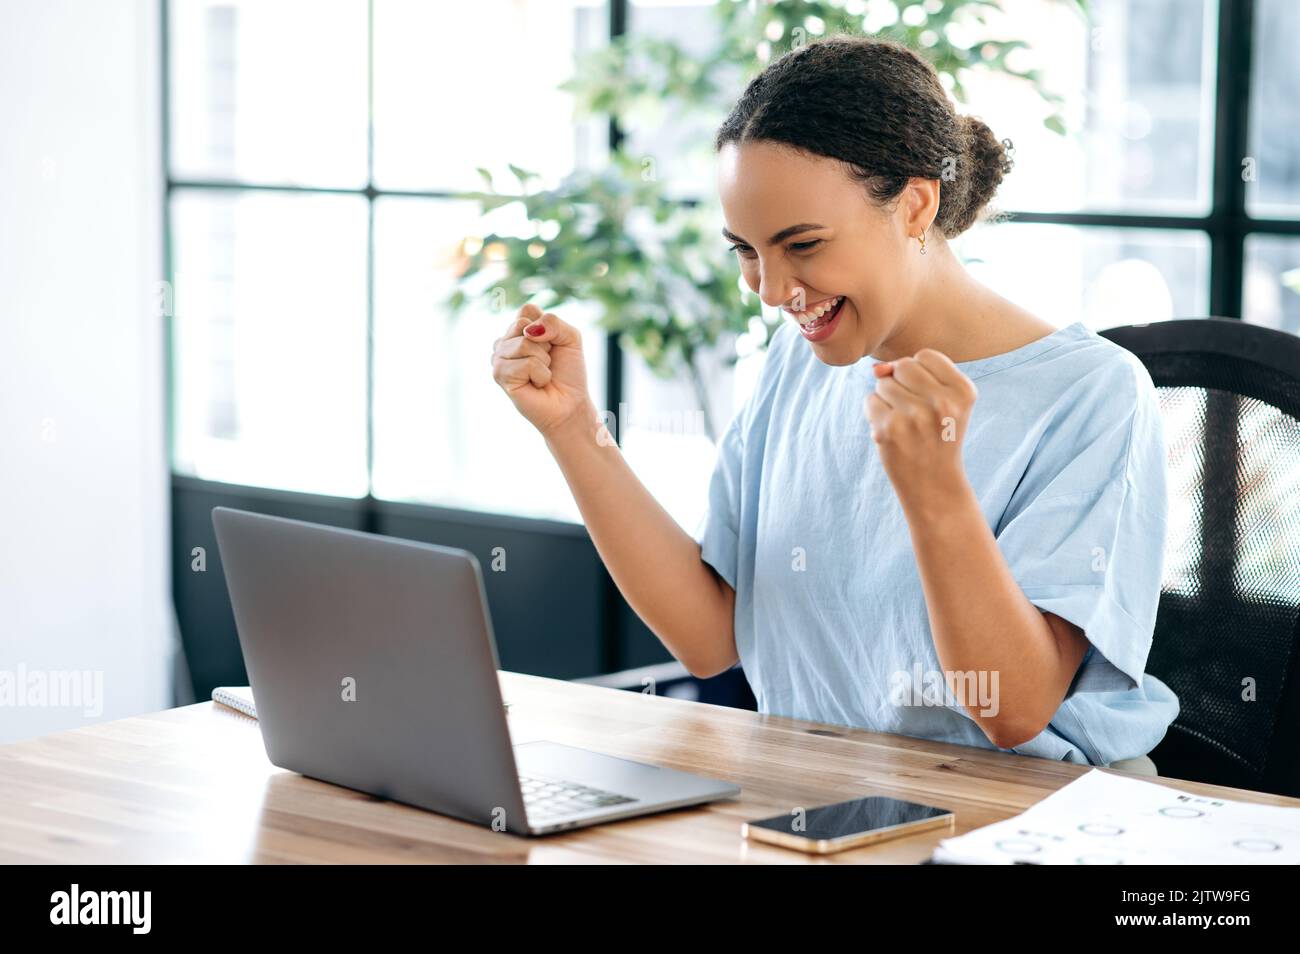 Joyful amazed happy brazilian or hispanic young business woman, sitting at a desk with a laptop in modern office, rejoicing in success, big profit, celebrate deal, gesturing with fists, smiling Stock Photo